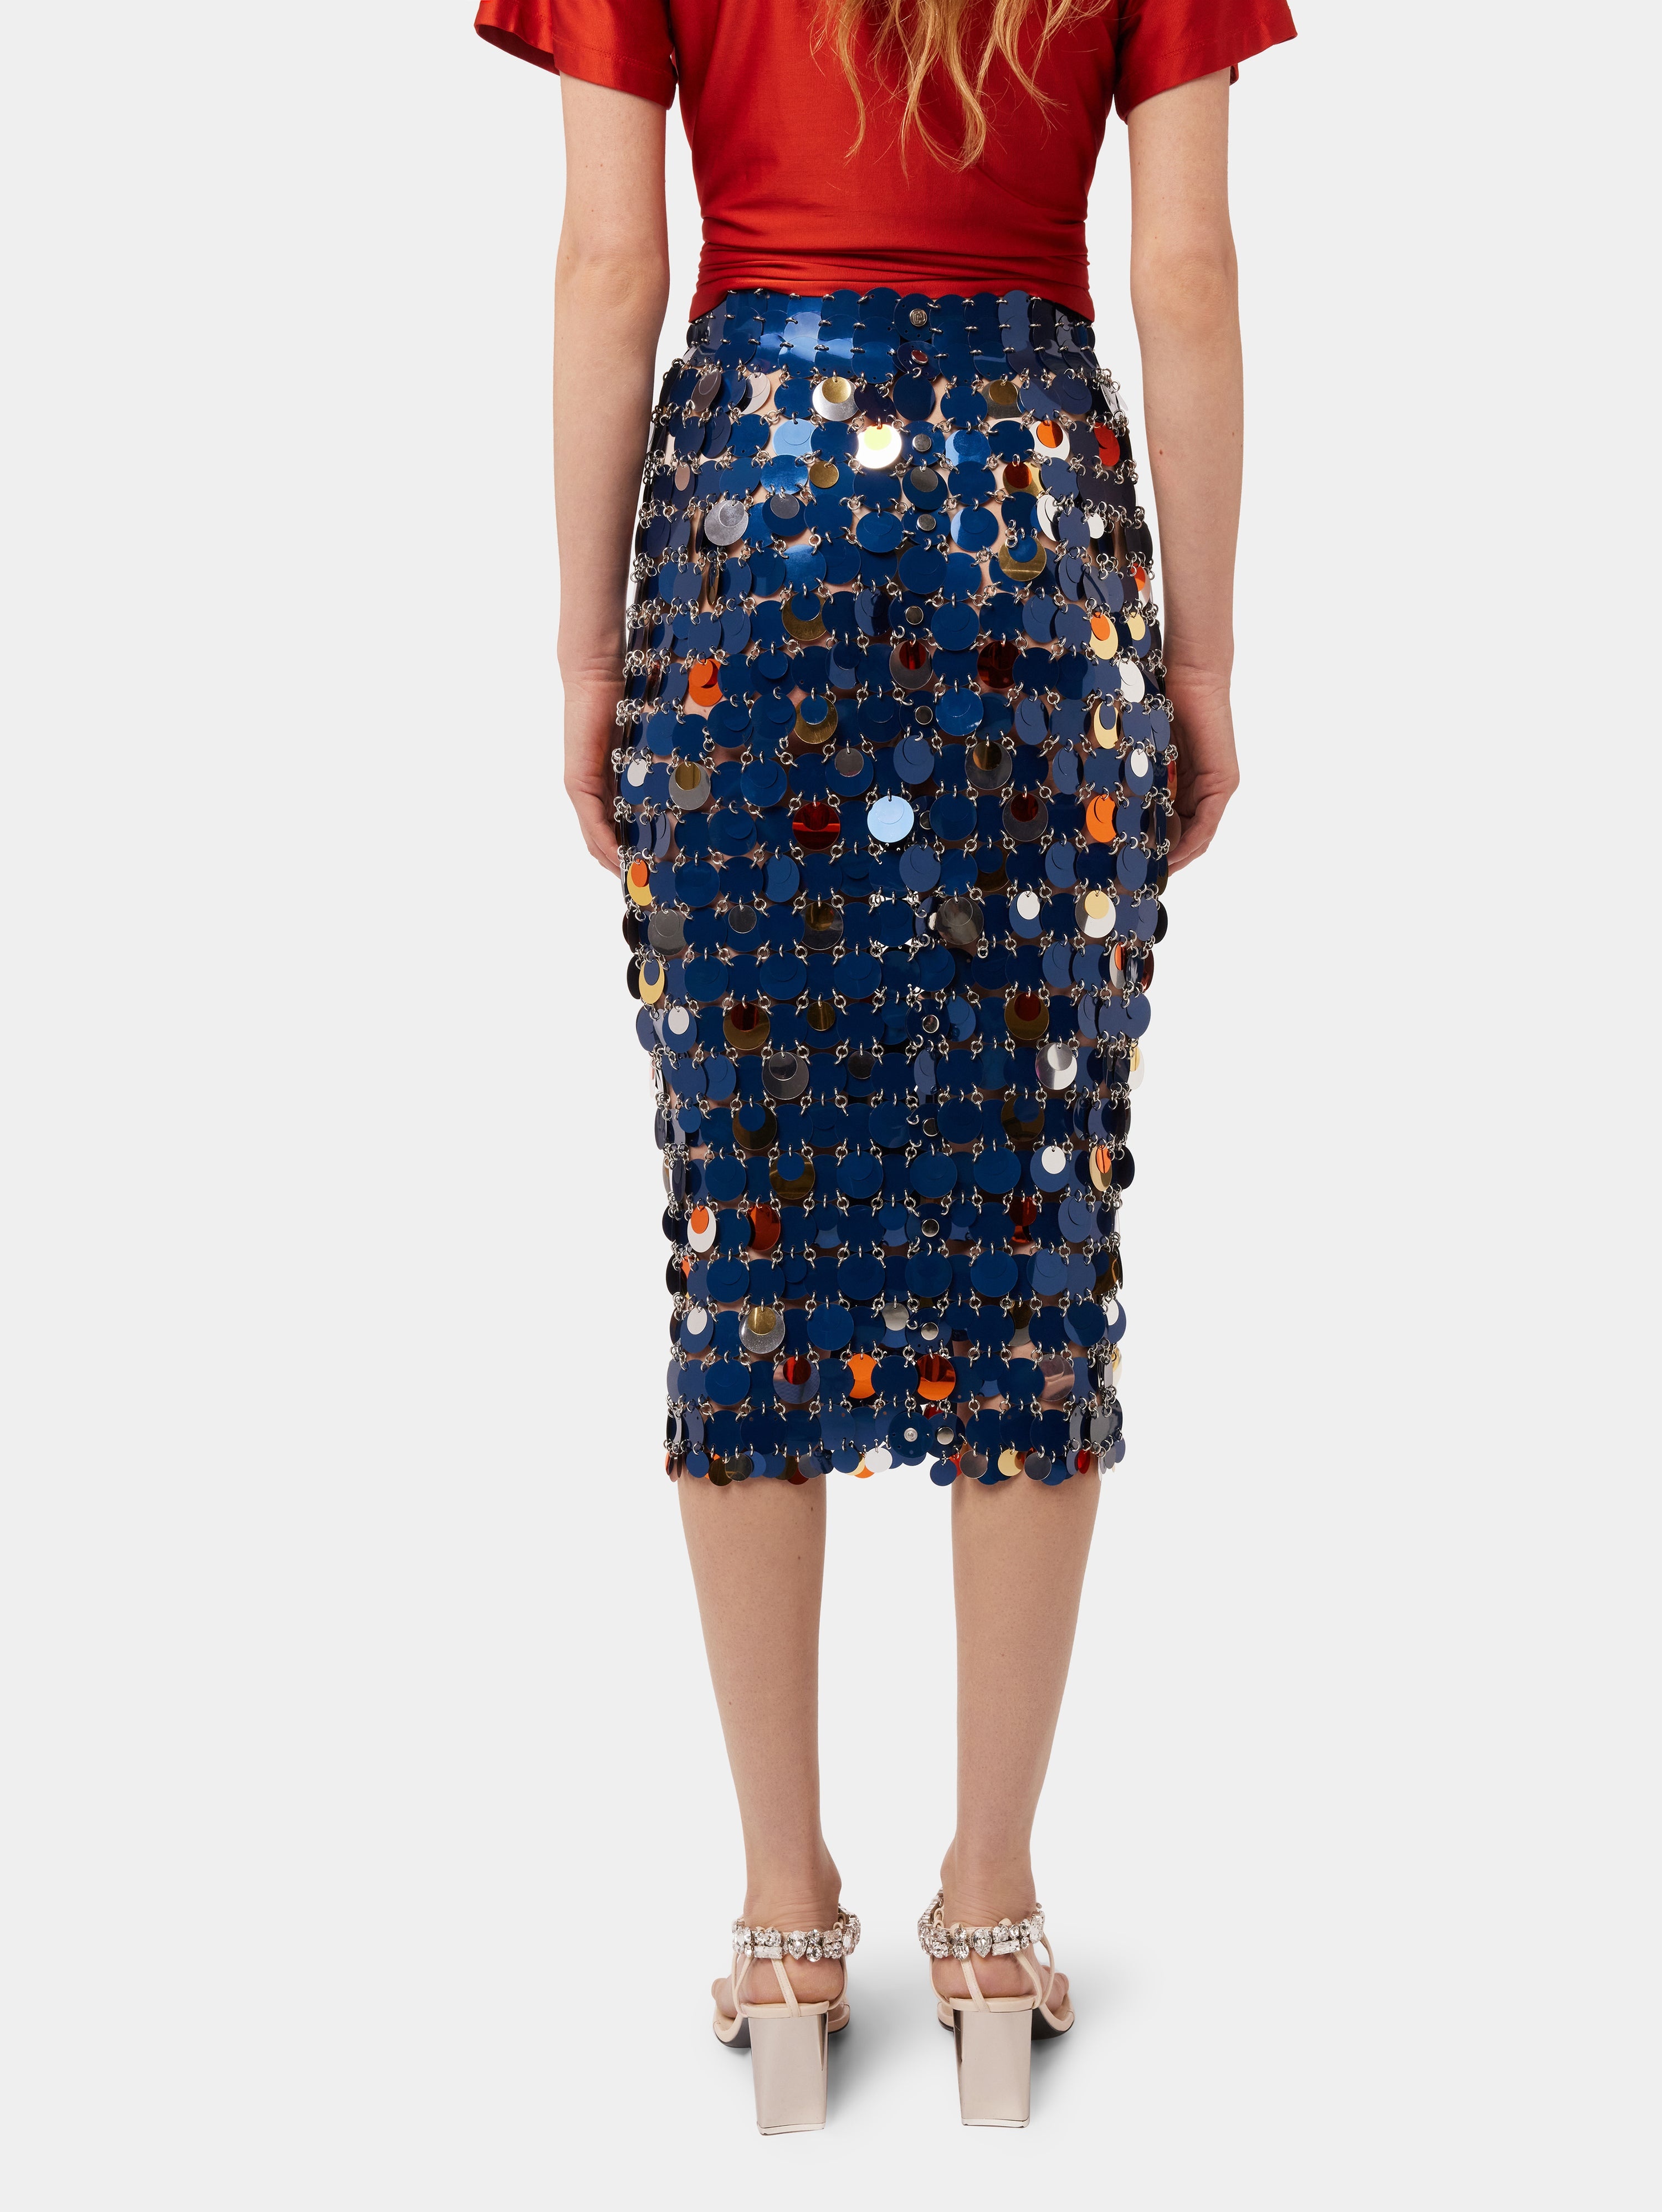 BLUE LONG SKIRT WITH SPARKLES ASSEMBLY - 5